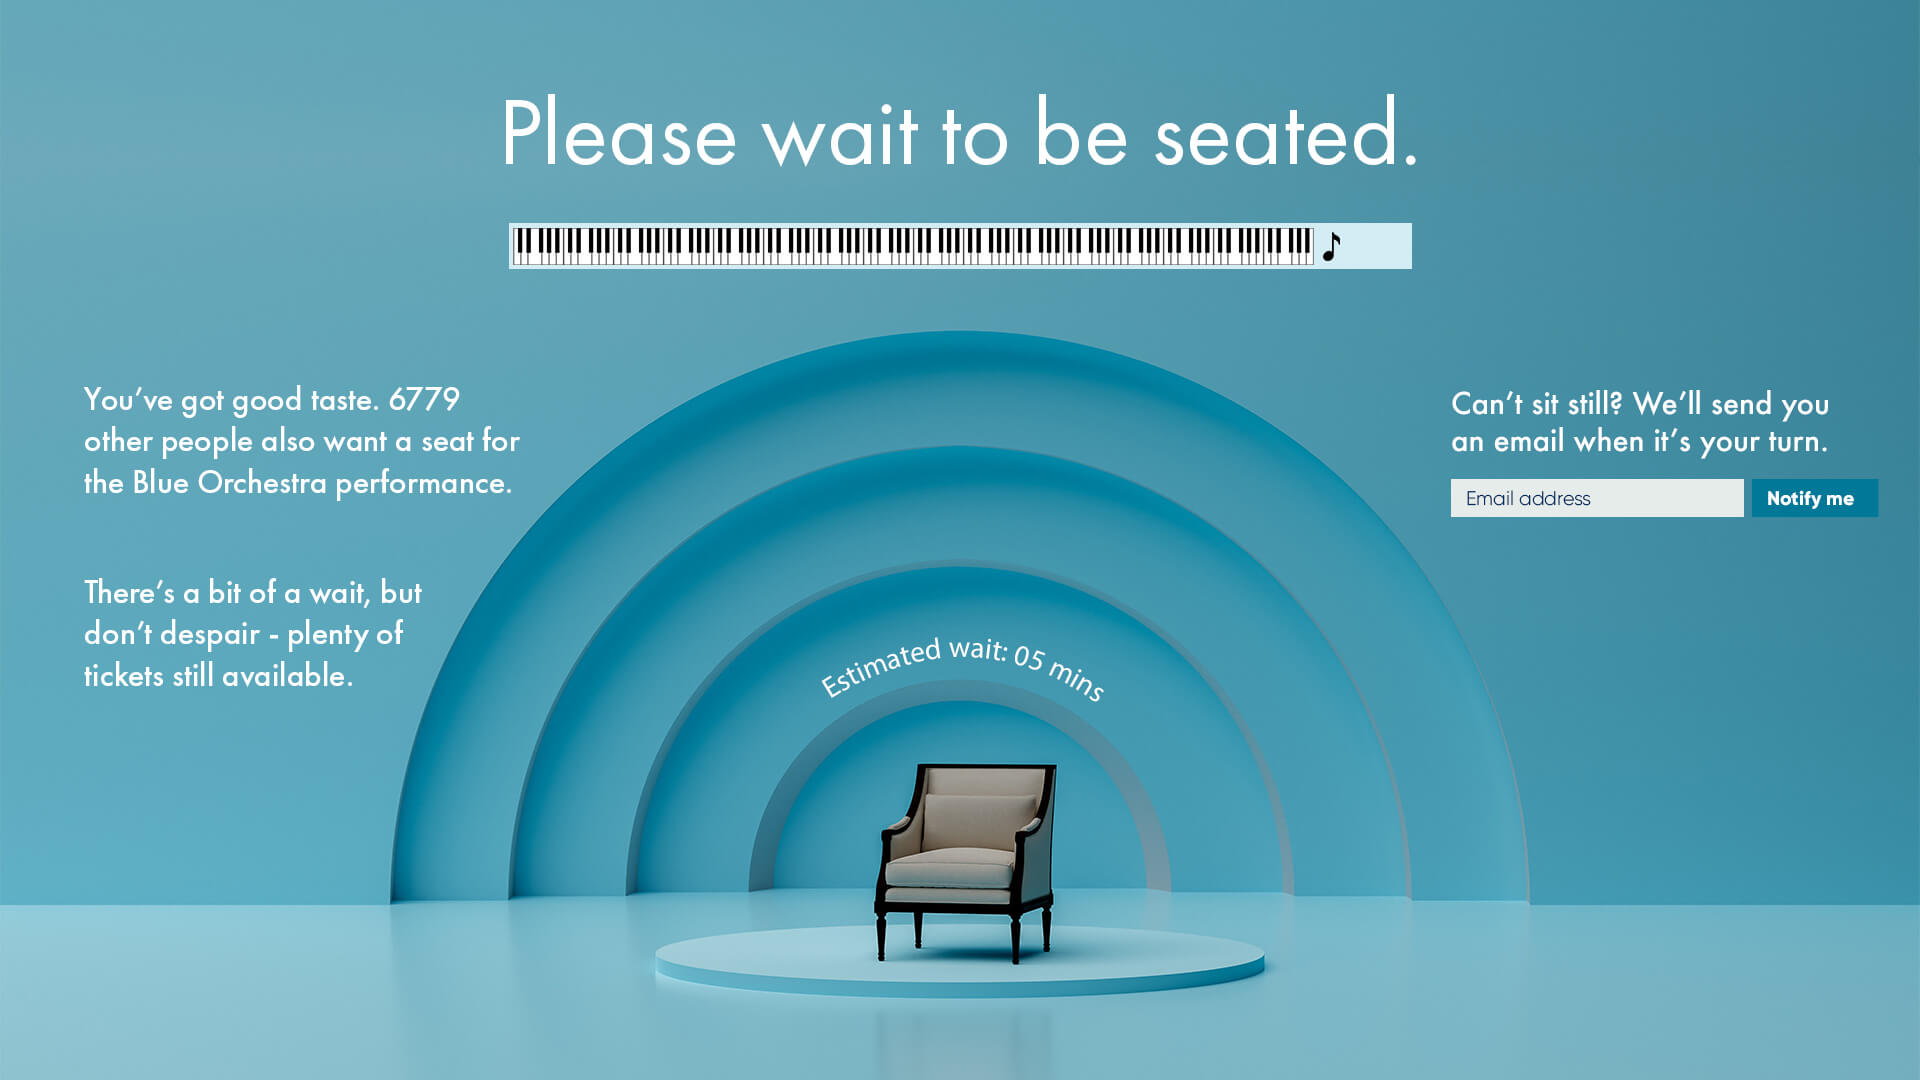 Waiting room queue page with text "You've got good taste. 6779 other people also want a seat"